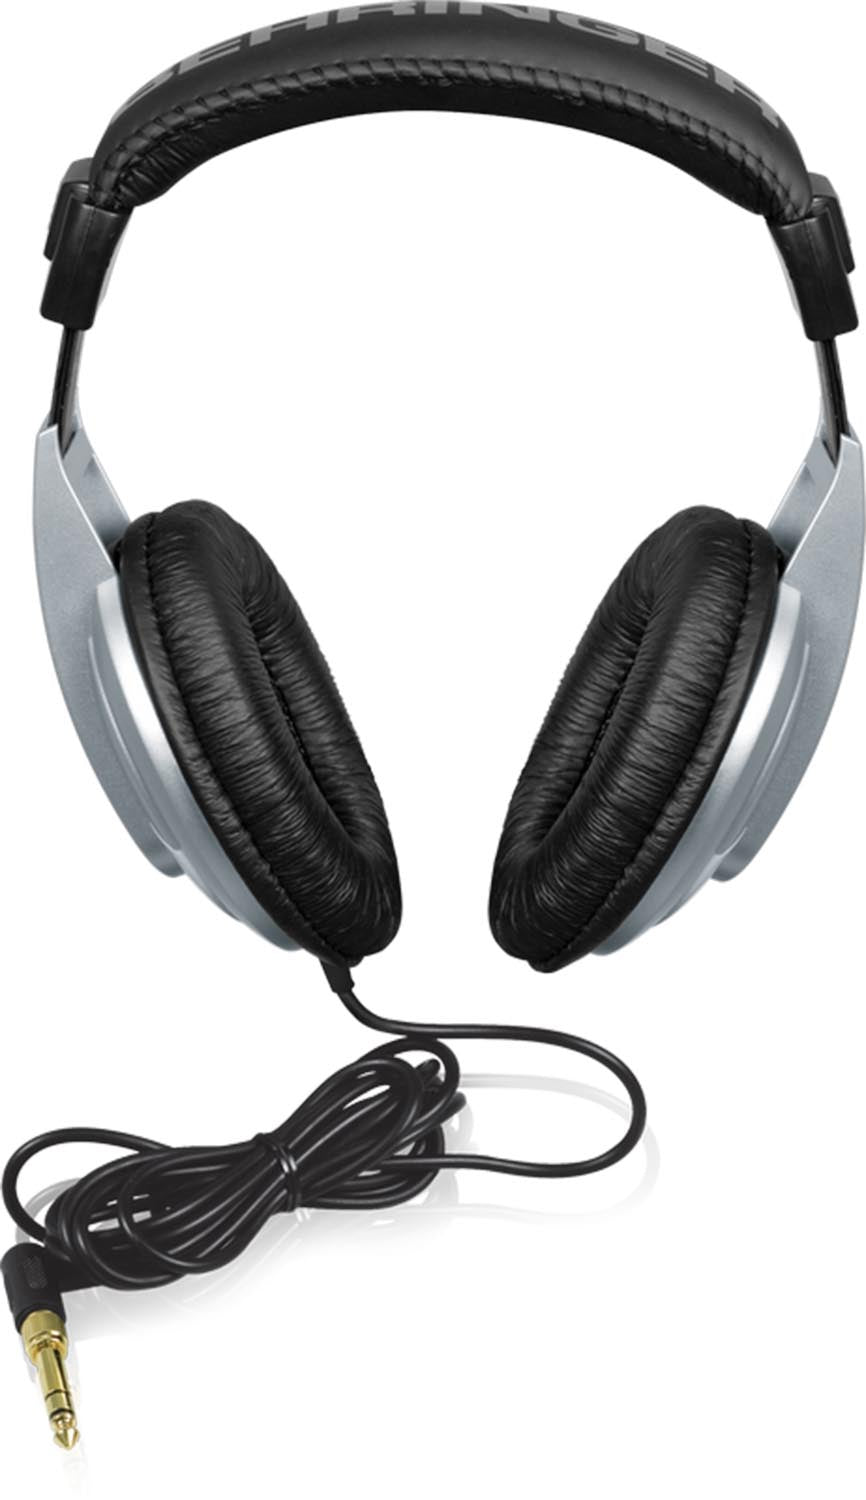 Behringer HPM1000 Ultra wide Frequency Multi-Purpose Closed-back Headphones - Hollywood DJ